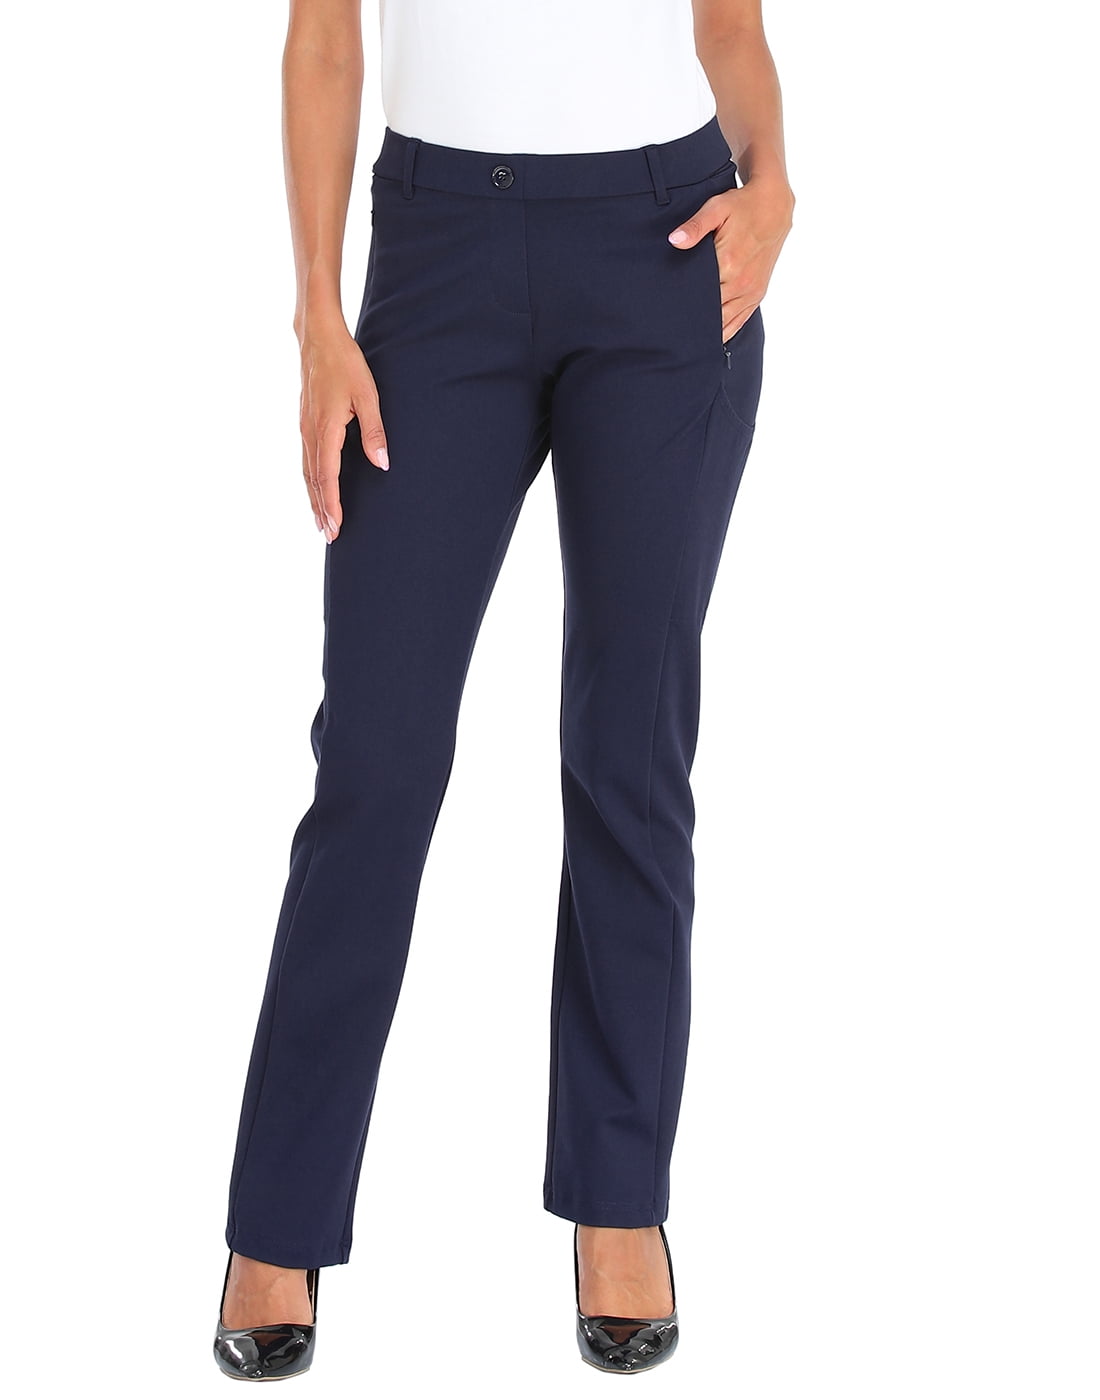 HDE Yoga Dress Pants for Women Straight Leg Pull On Pants with 8 Pockets  Navy Blue - XL Long 